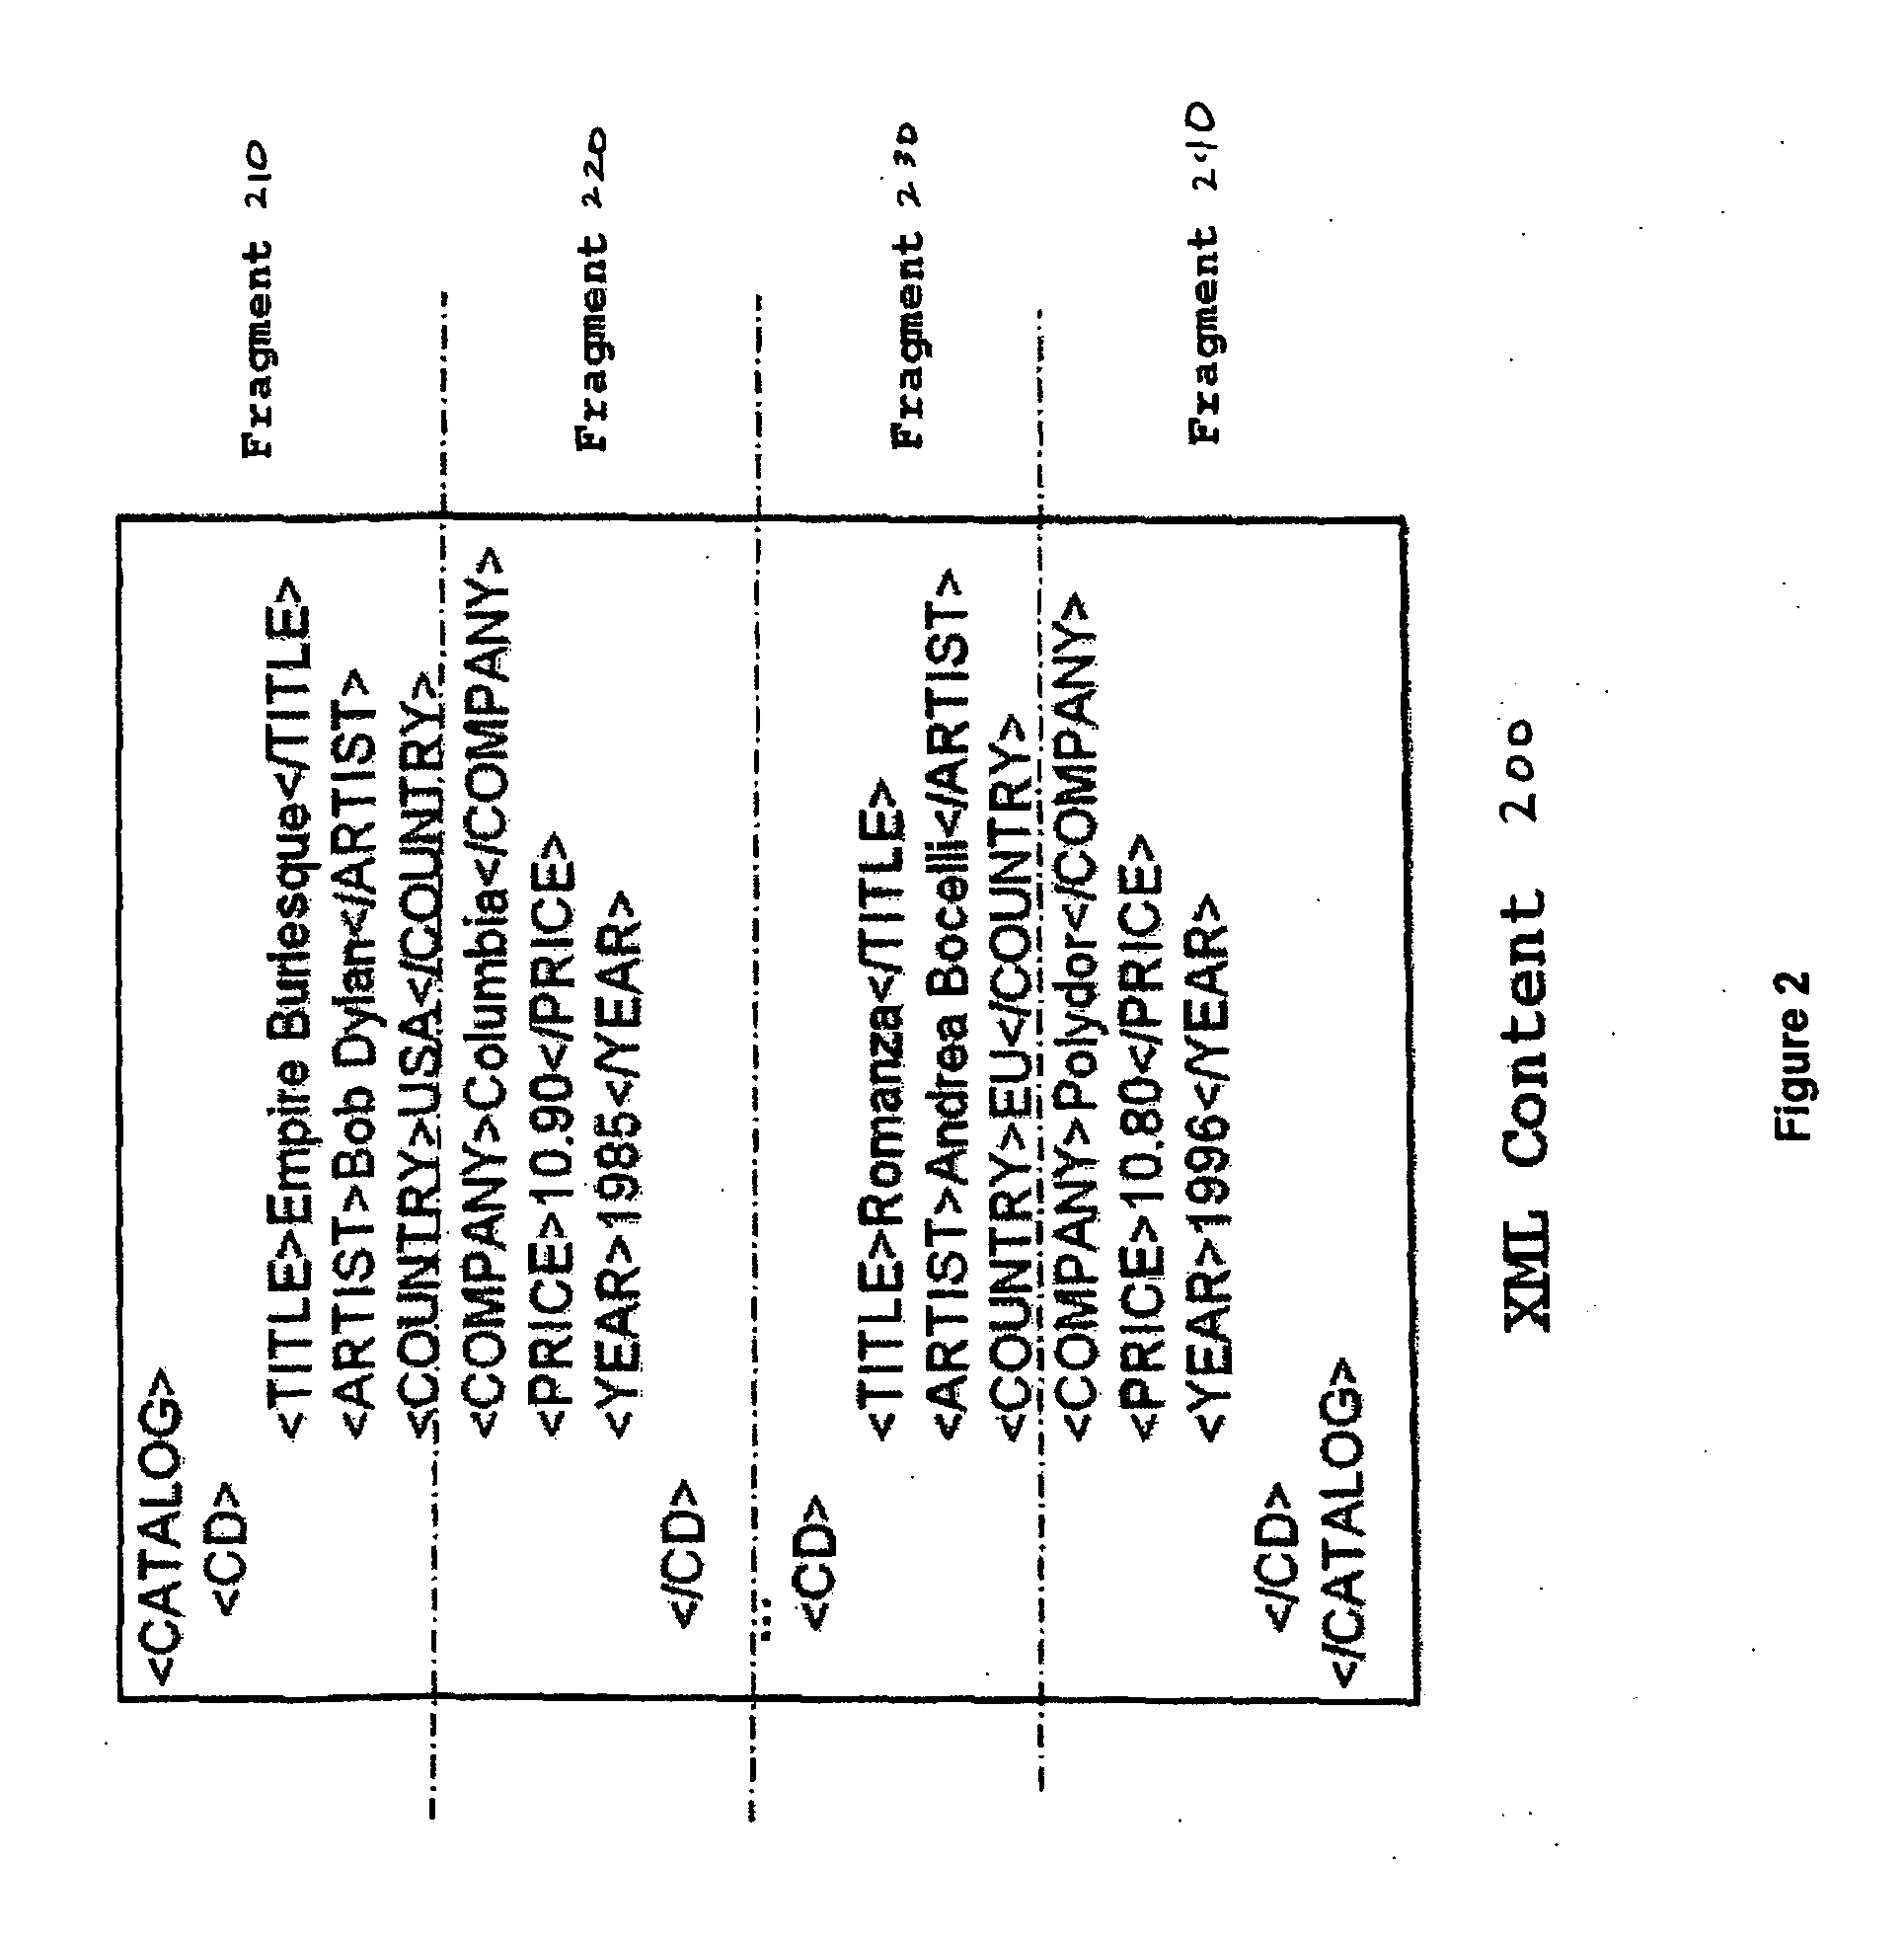 System and method of XML based content fragmentation for rich media streaming